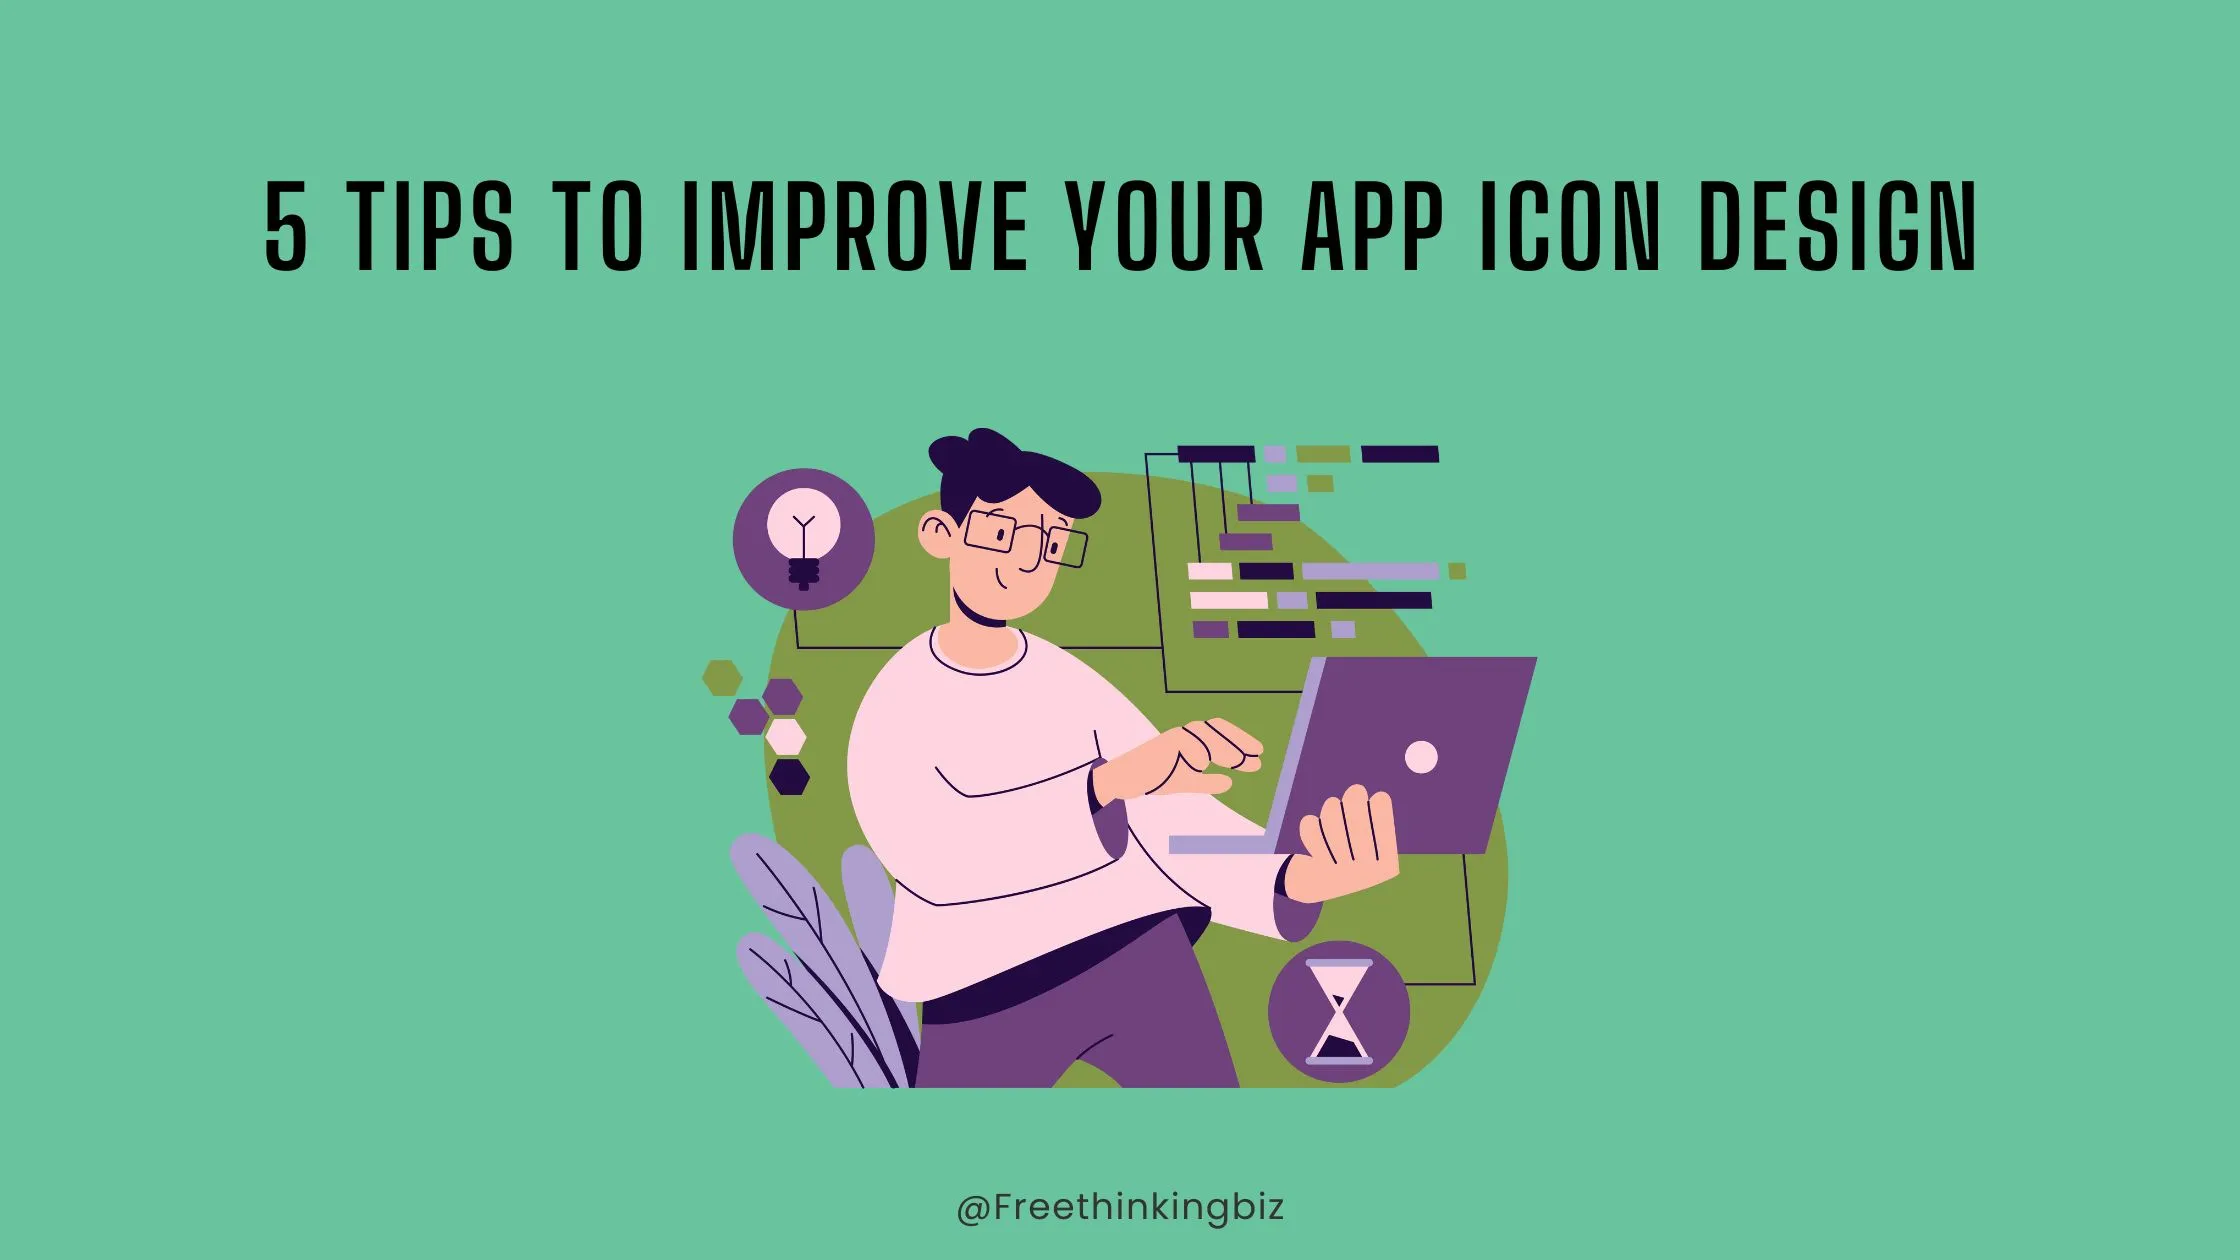 5 tips to improve your app icon design